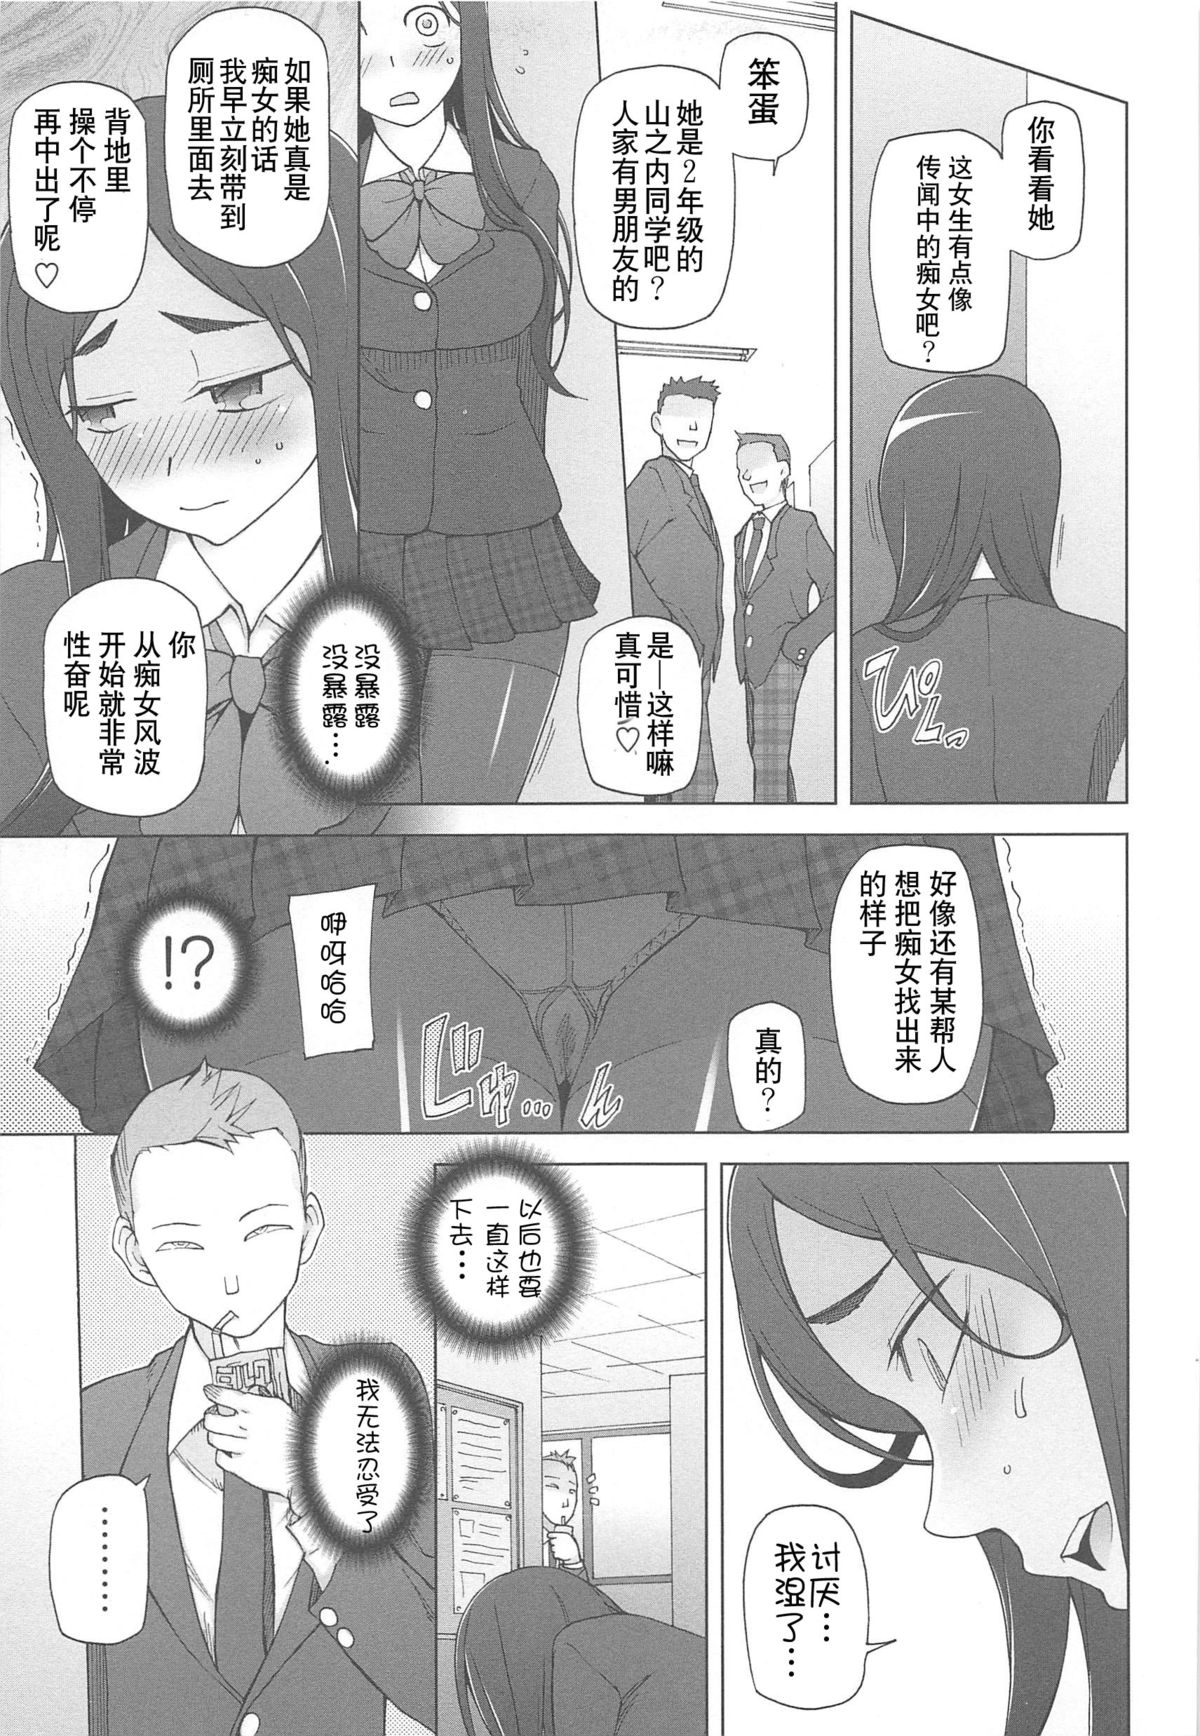 [Miito Shido] LUSTFUL BERRY Ch. 4 [Chinese] [joungpig个人汉化] page 3 full